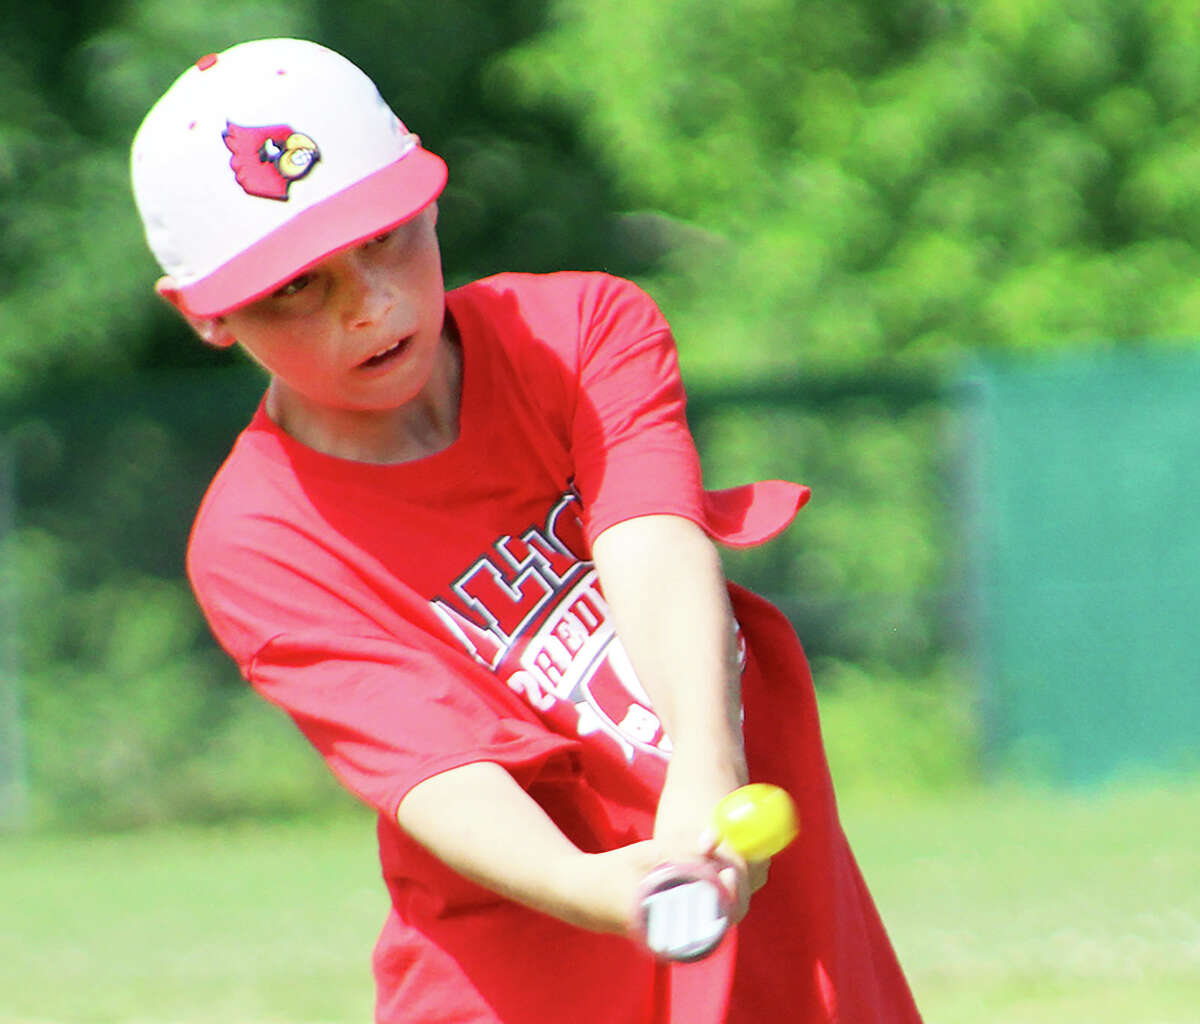 Keeping his head in and watching the ball, baseball camper Gavin Schrock makes connection with the batting practice ball on Wednesday during the Redbirds Baseball Camp at Alton High.